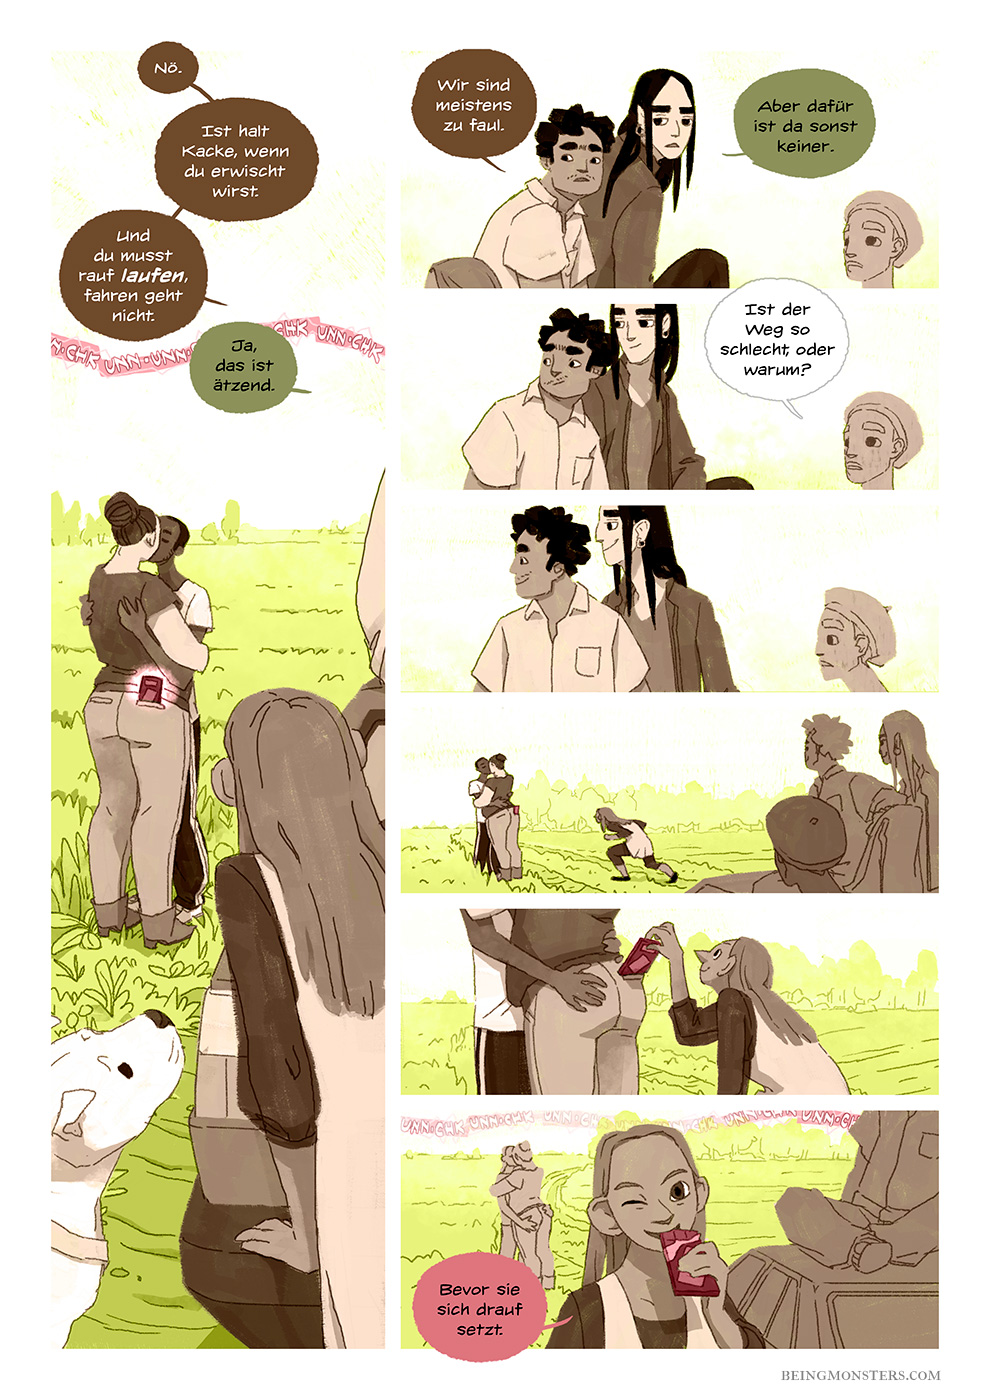 Being Monsters Book 1 Chapter 2 page 13 EN